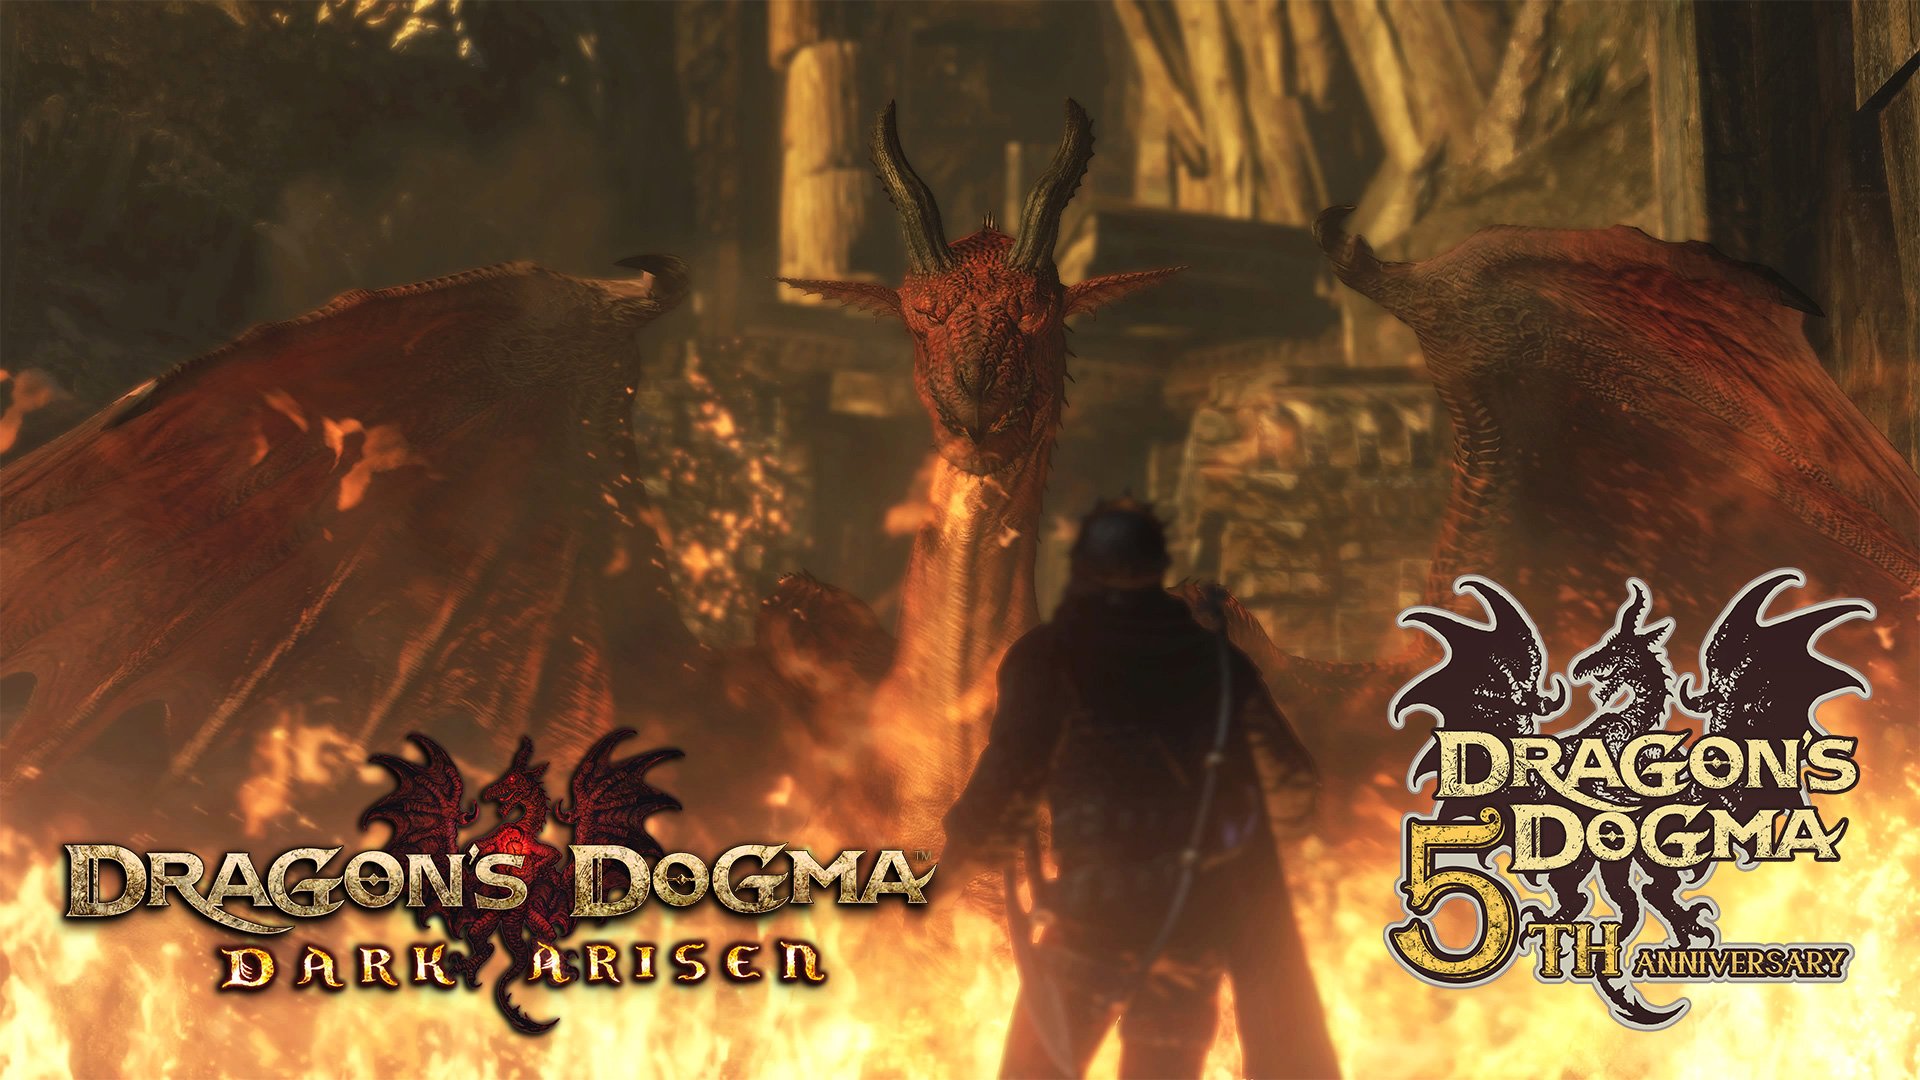 mirakel friktion dosis Dragon's Dogma on Twitter: "Rise and reclaim your heart from the grasp of  the dragon Grigori! Dragon's Dogma: Dark Arisen is available now on PS4 and  Xbox One. https://t.co/3acSH8cTaA" / Twitter